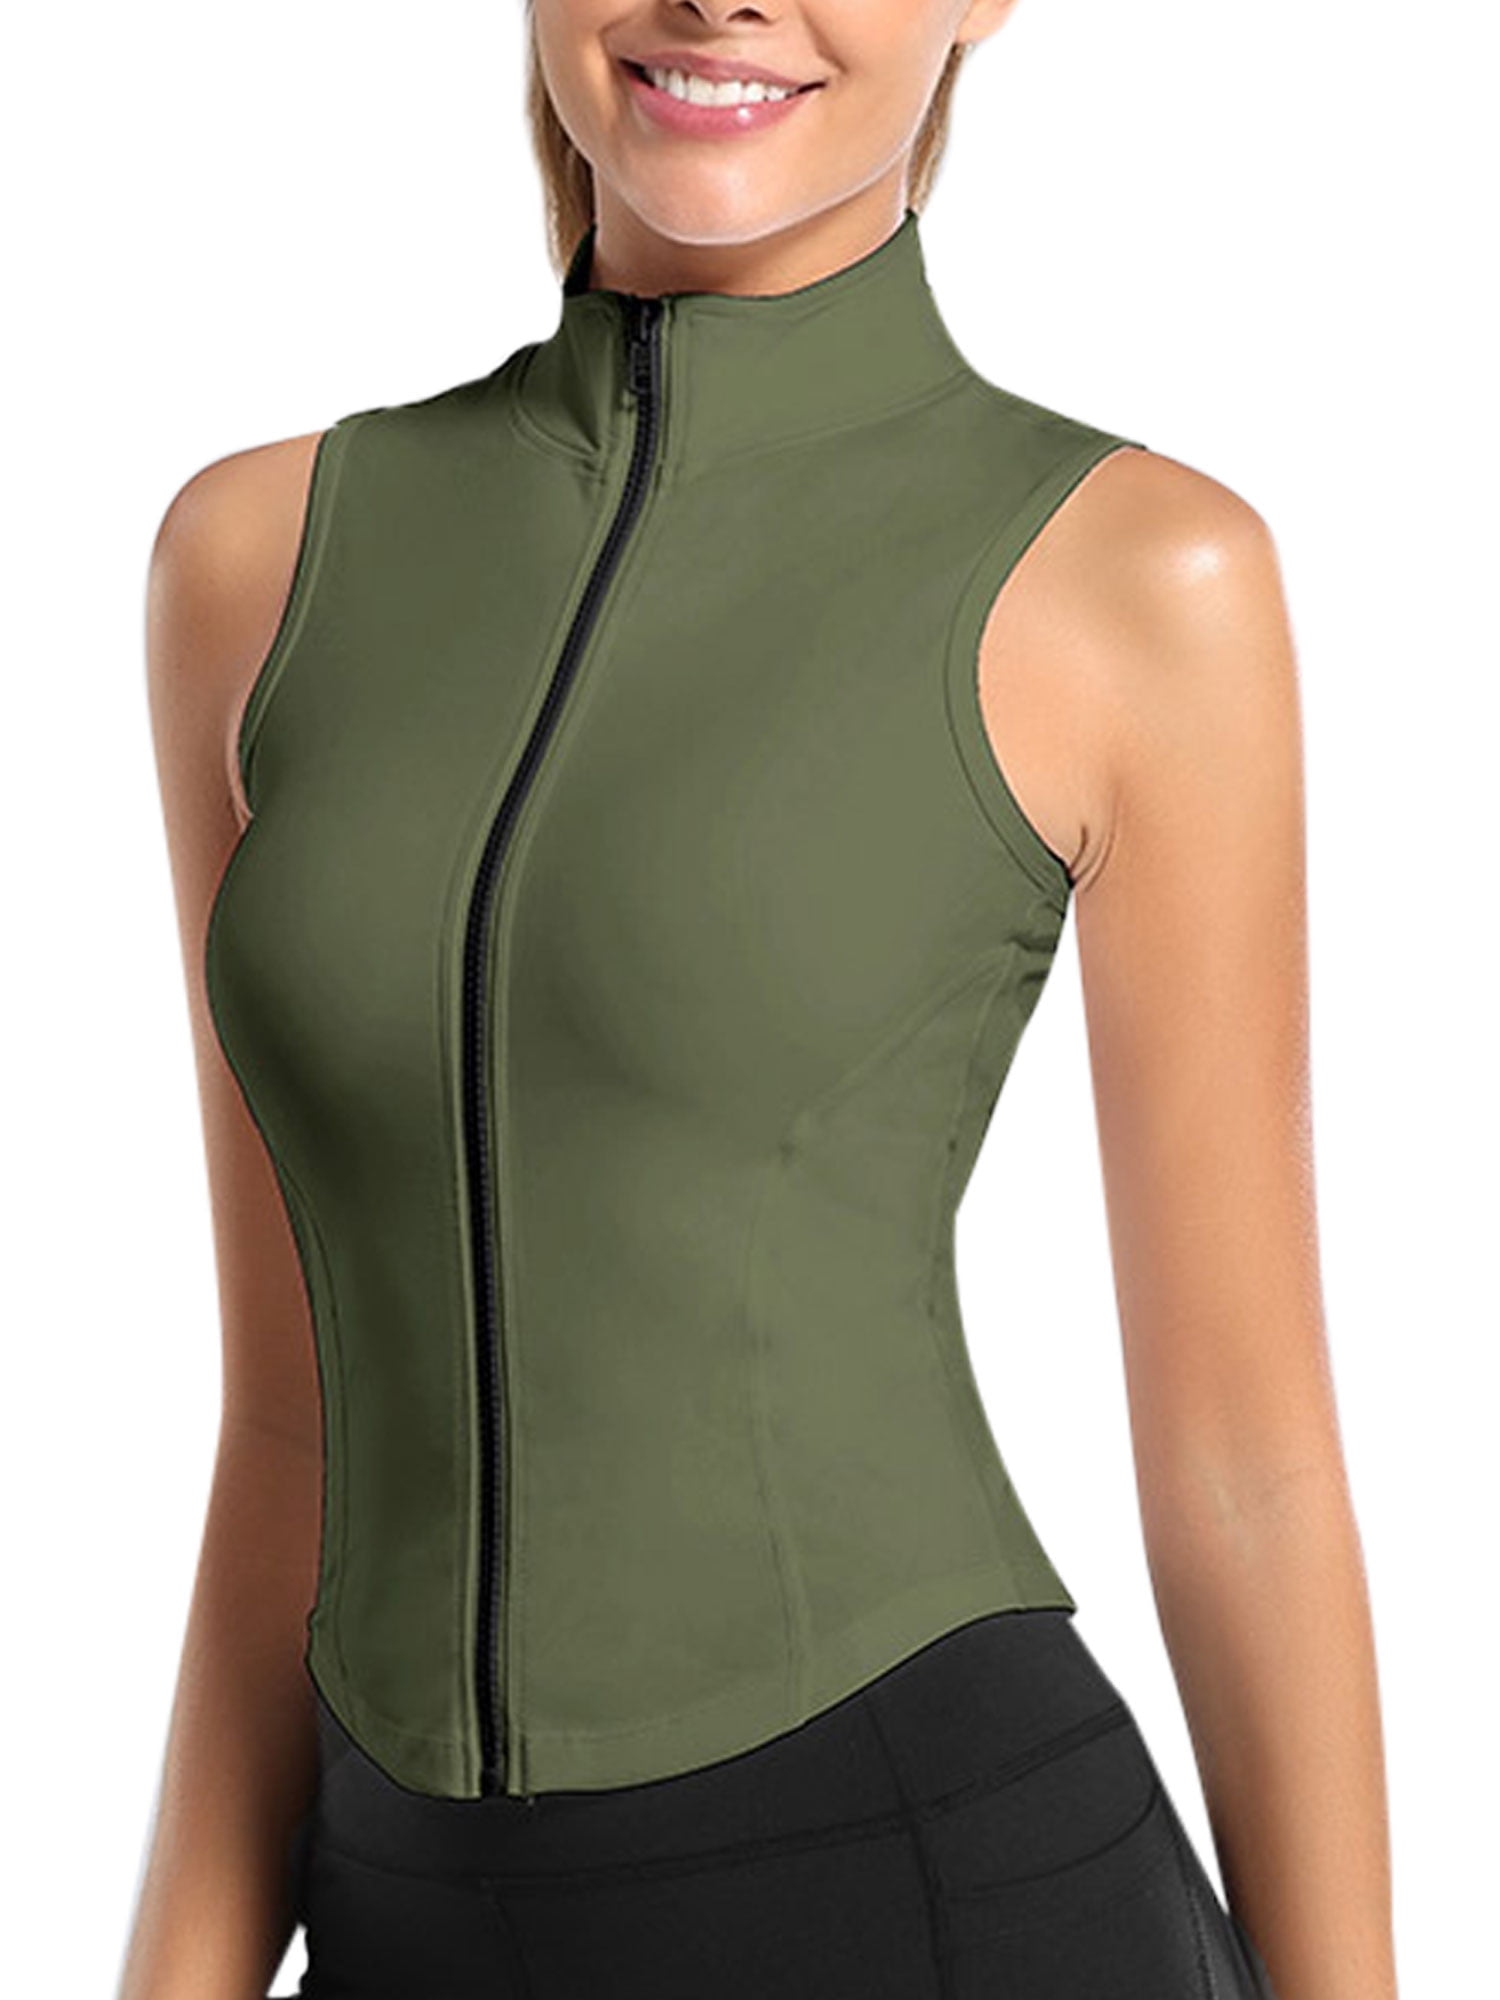 Womens High Polo Turtle Neck Sleeveless Stretch Plain Vest Crop Top 8 10 12 14